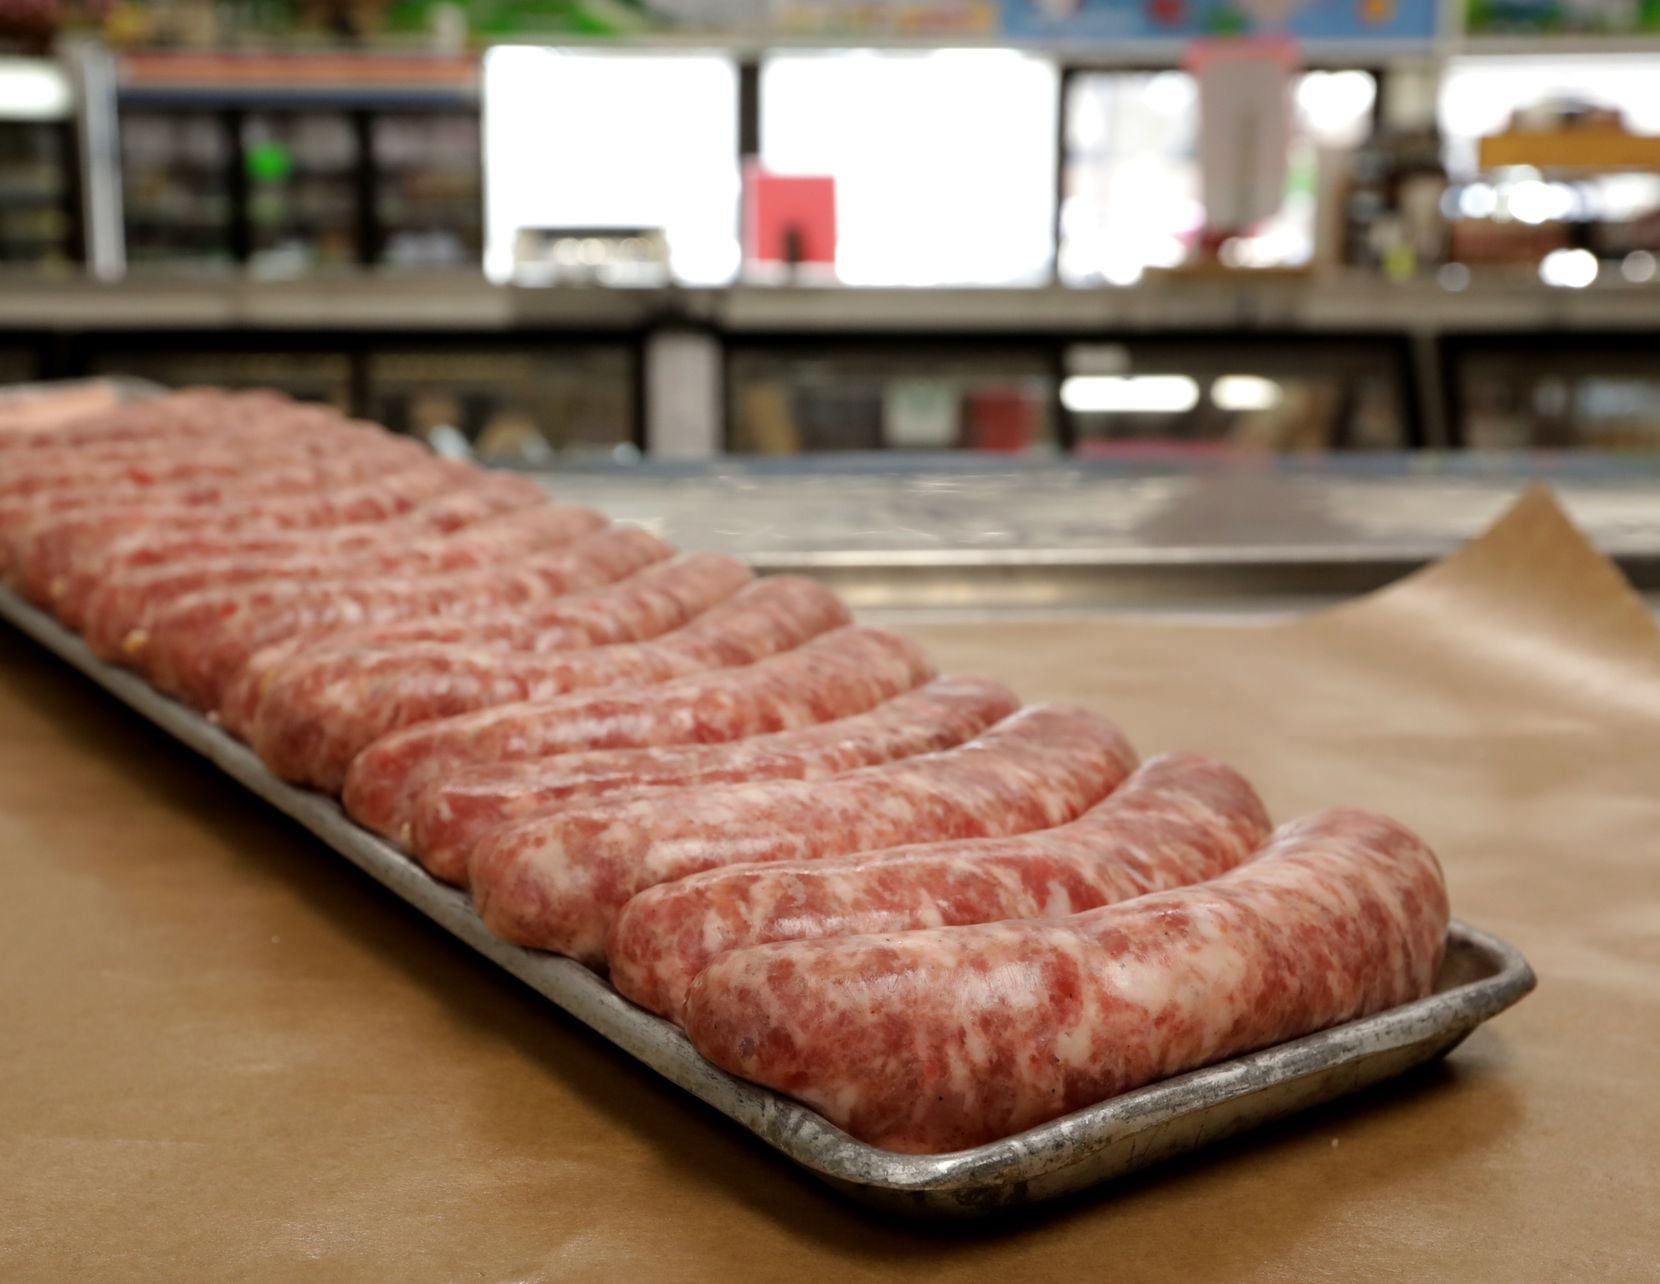 Hirsch's Specialty Meats in Plano specializes in sausage.